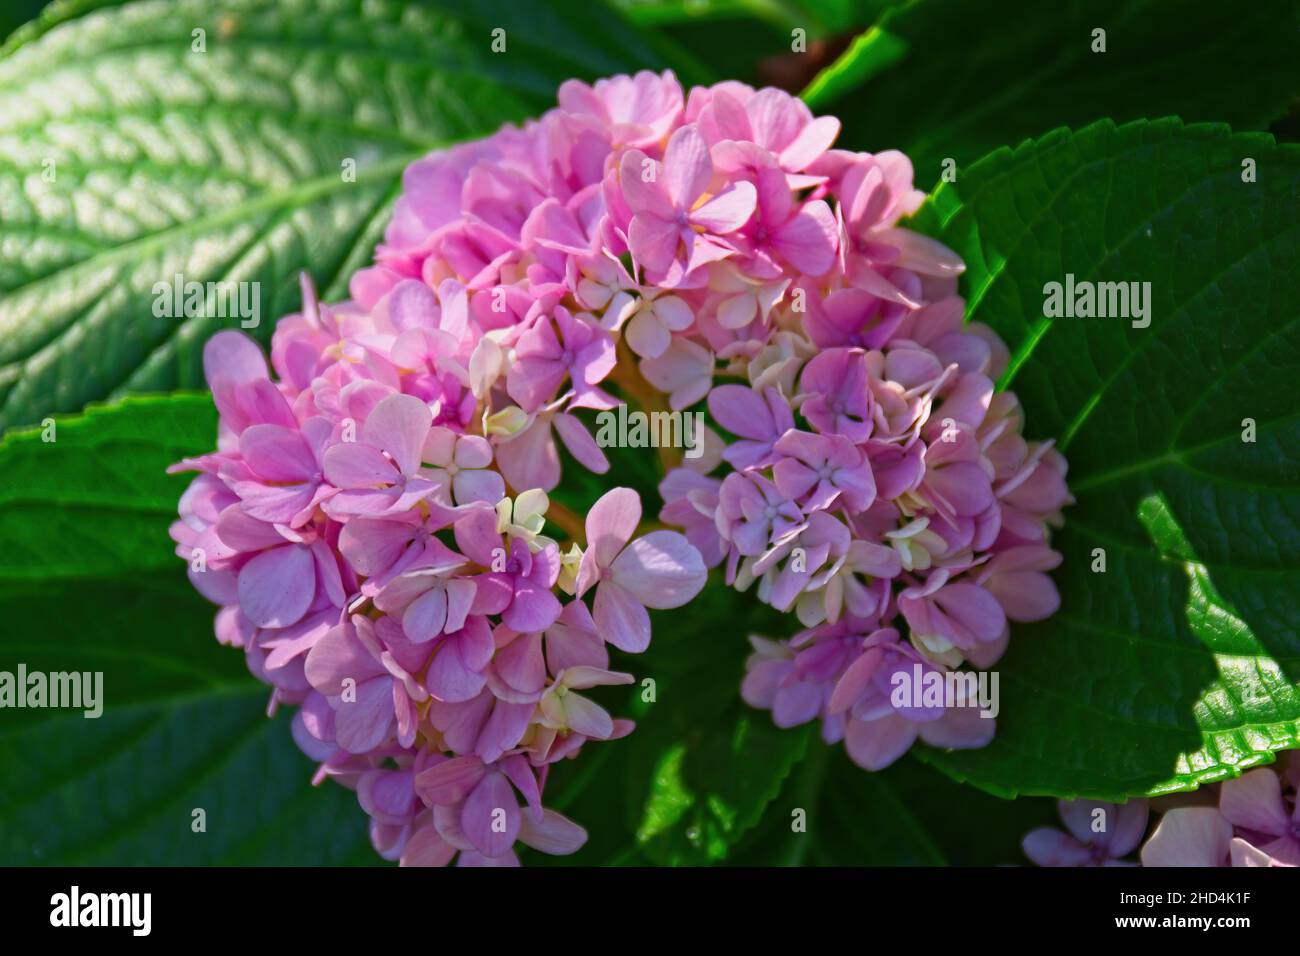 closeup of flowers blooming in a garden Stock Photo